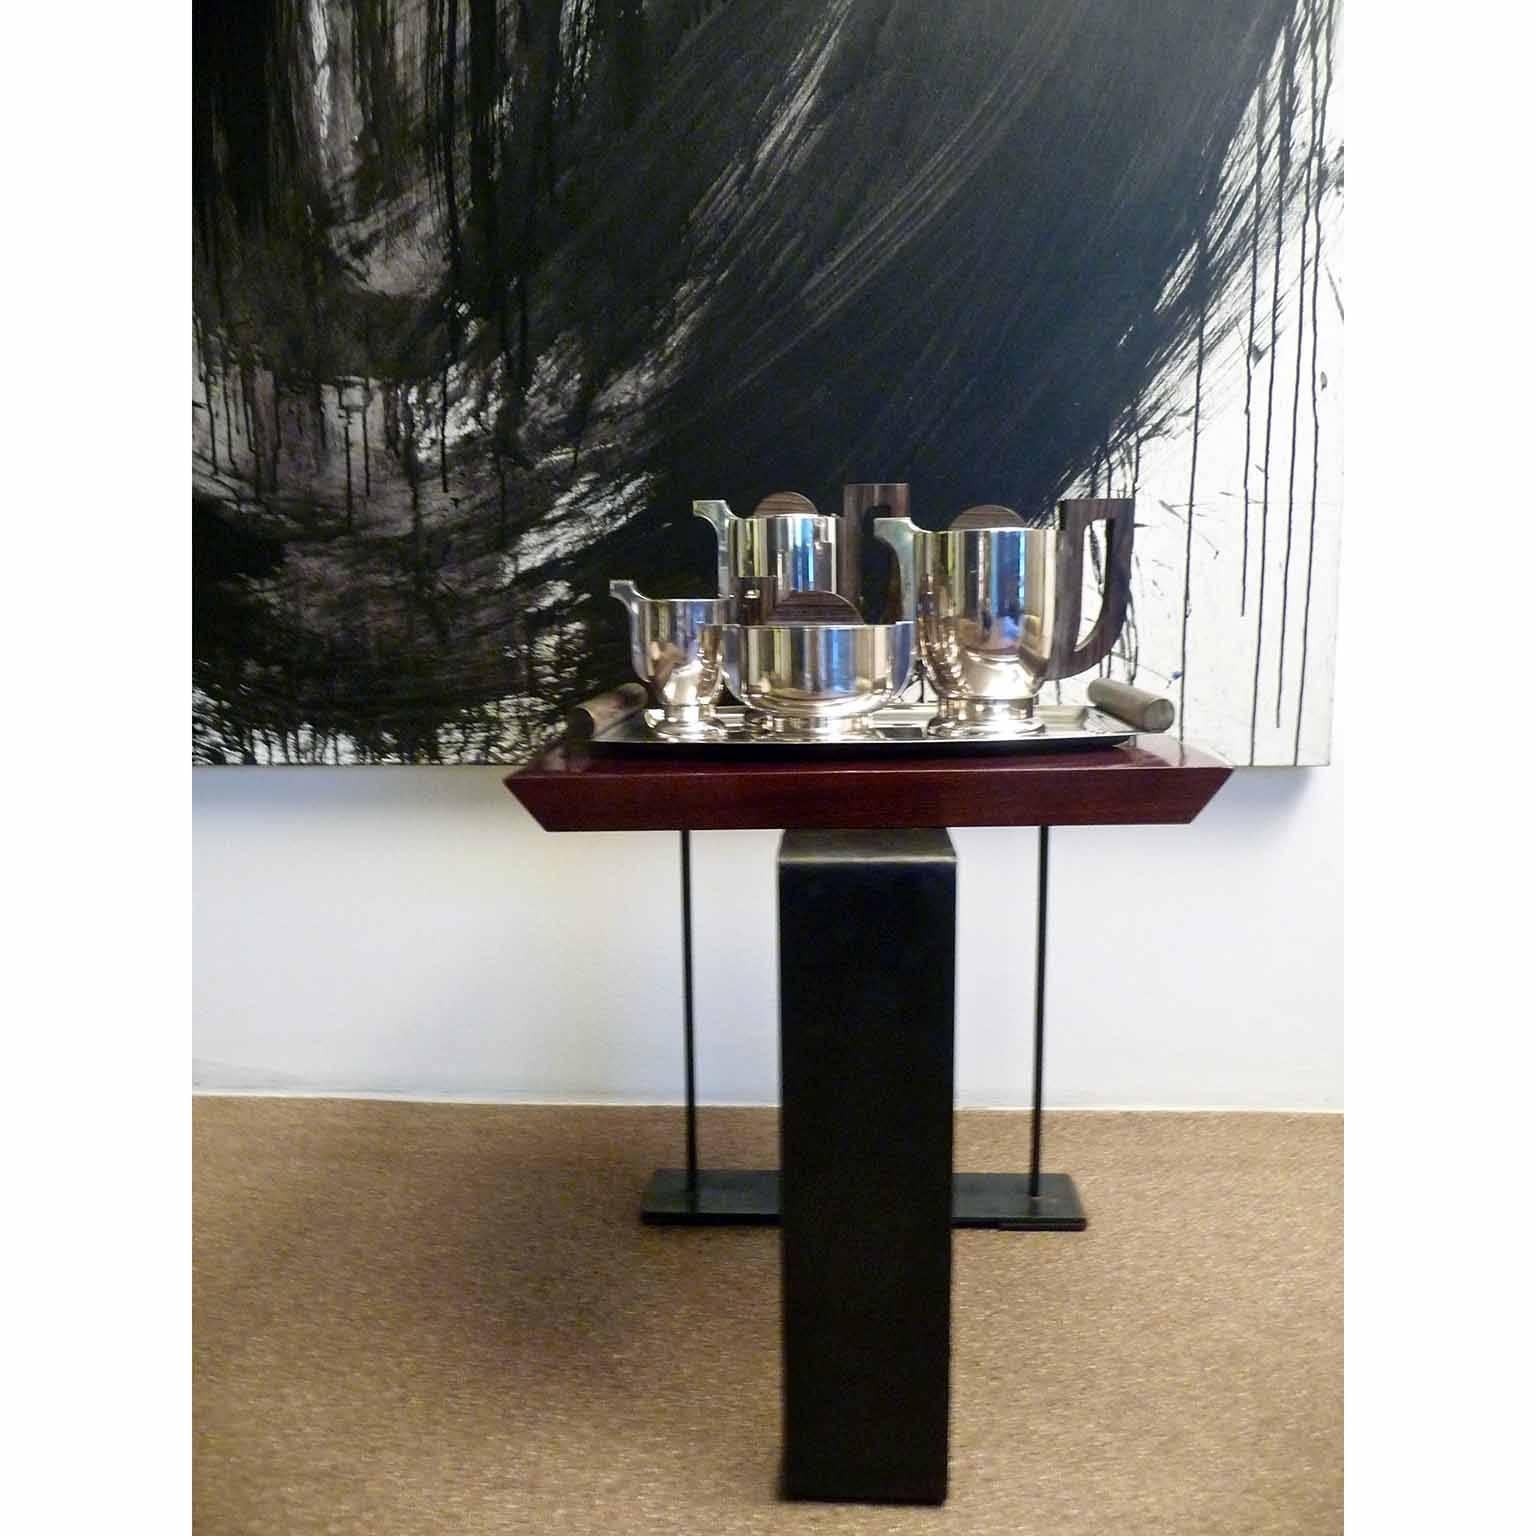 Exceptional Art Deco design tea or coffee service by the French orfevrerie Apollo.
Silver plated metal and Macassar handles, this service is a masterpiece.
Each Item marked with maker's mark, form number and silver plating quality